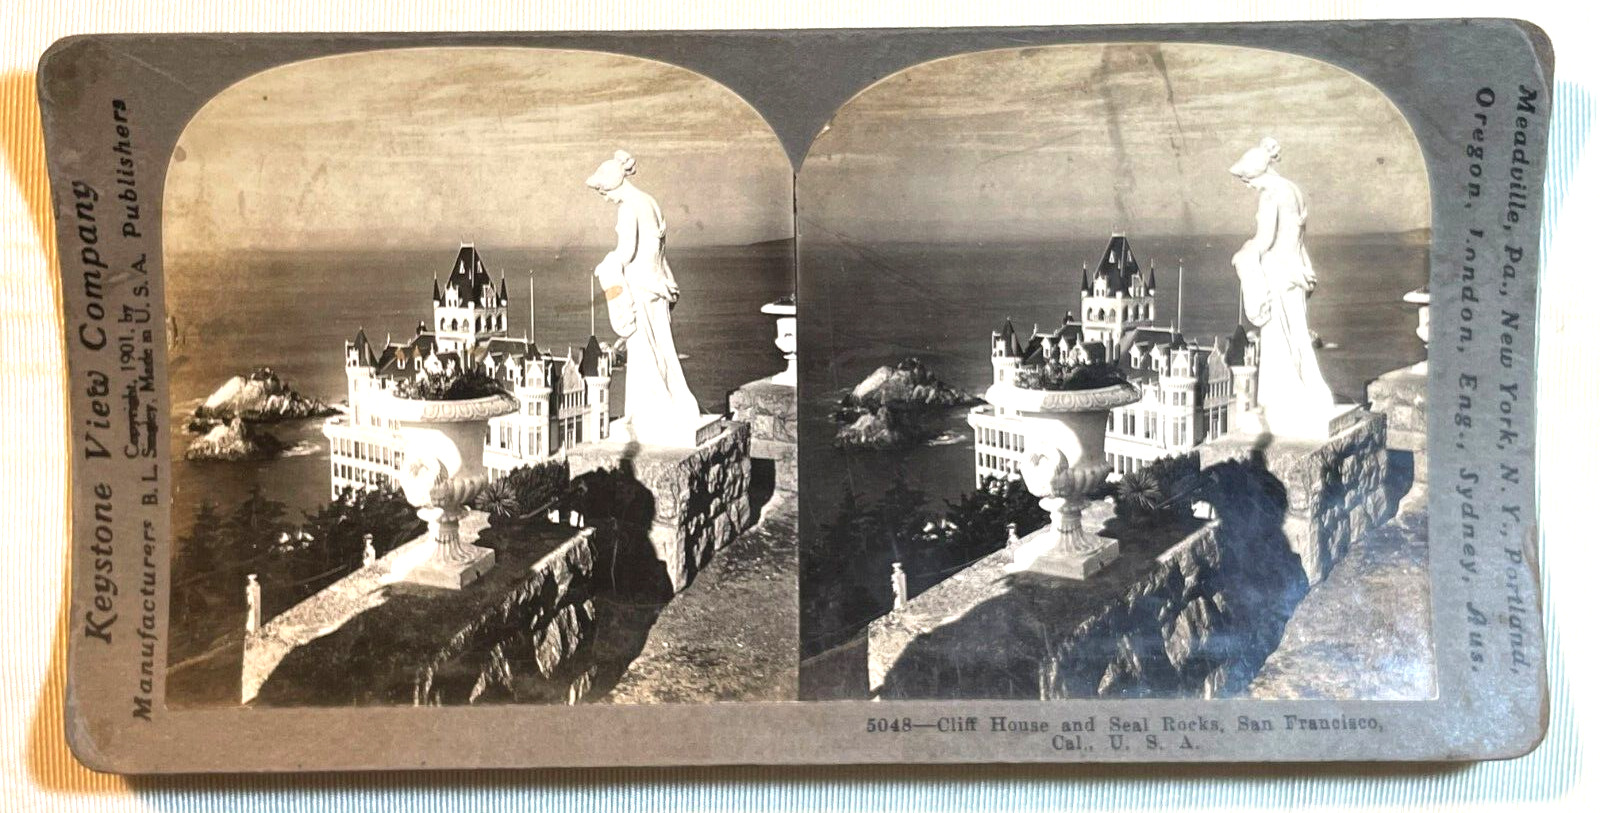 ANTIQUE KEYSTONE STEREO CARD VIEW CLIFF HOUSE & SEAL ROCKS, SAN FRANCISCO, CALIF